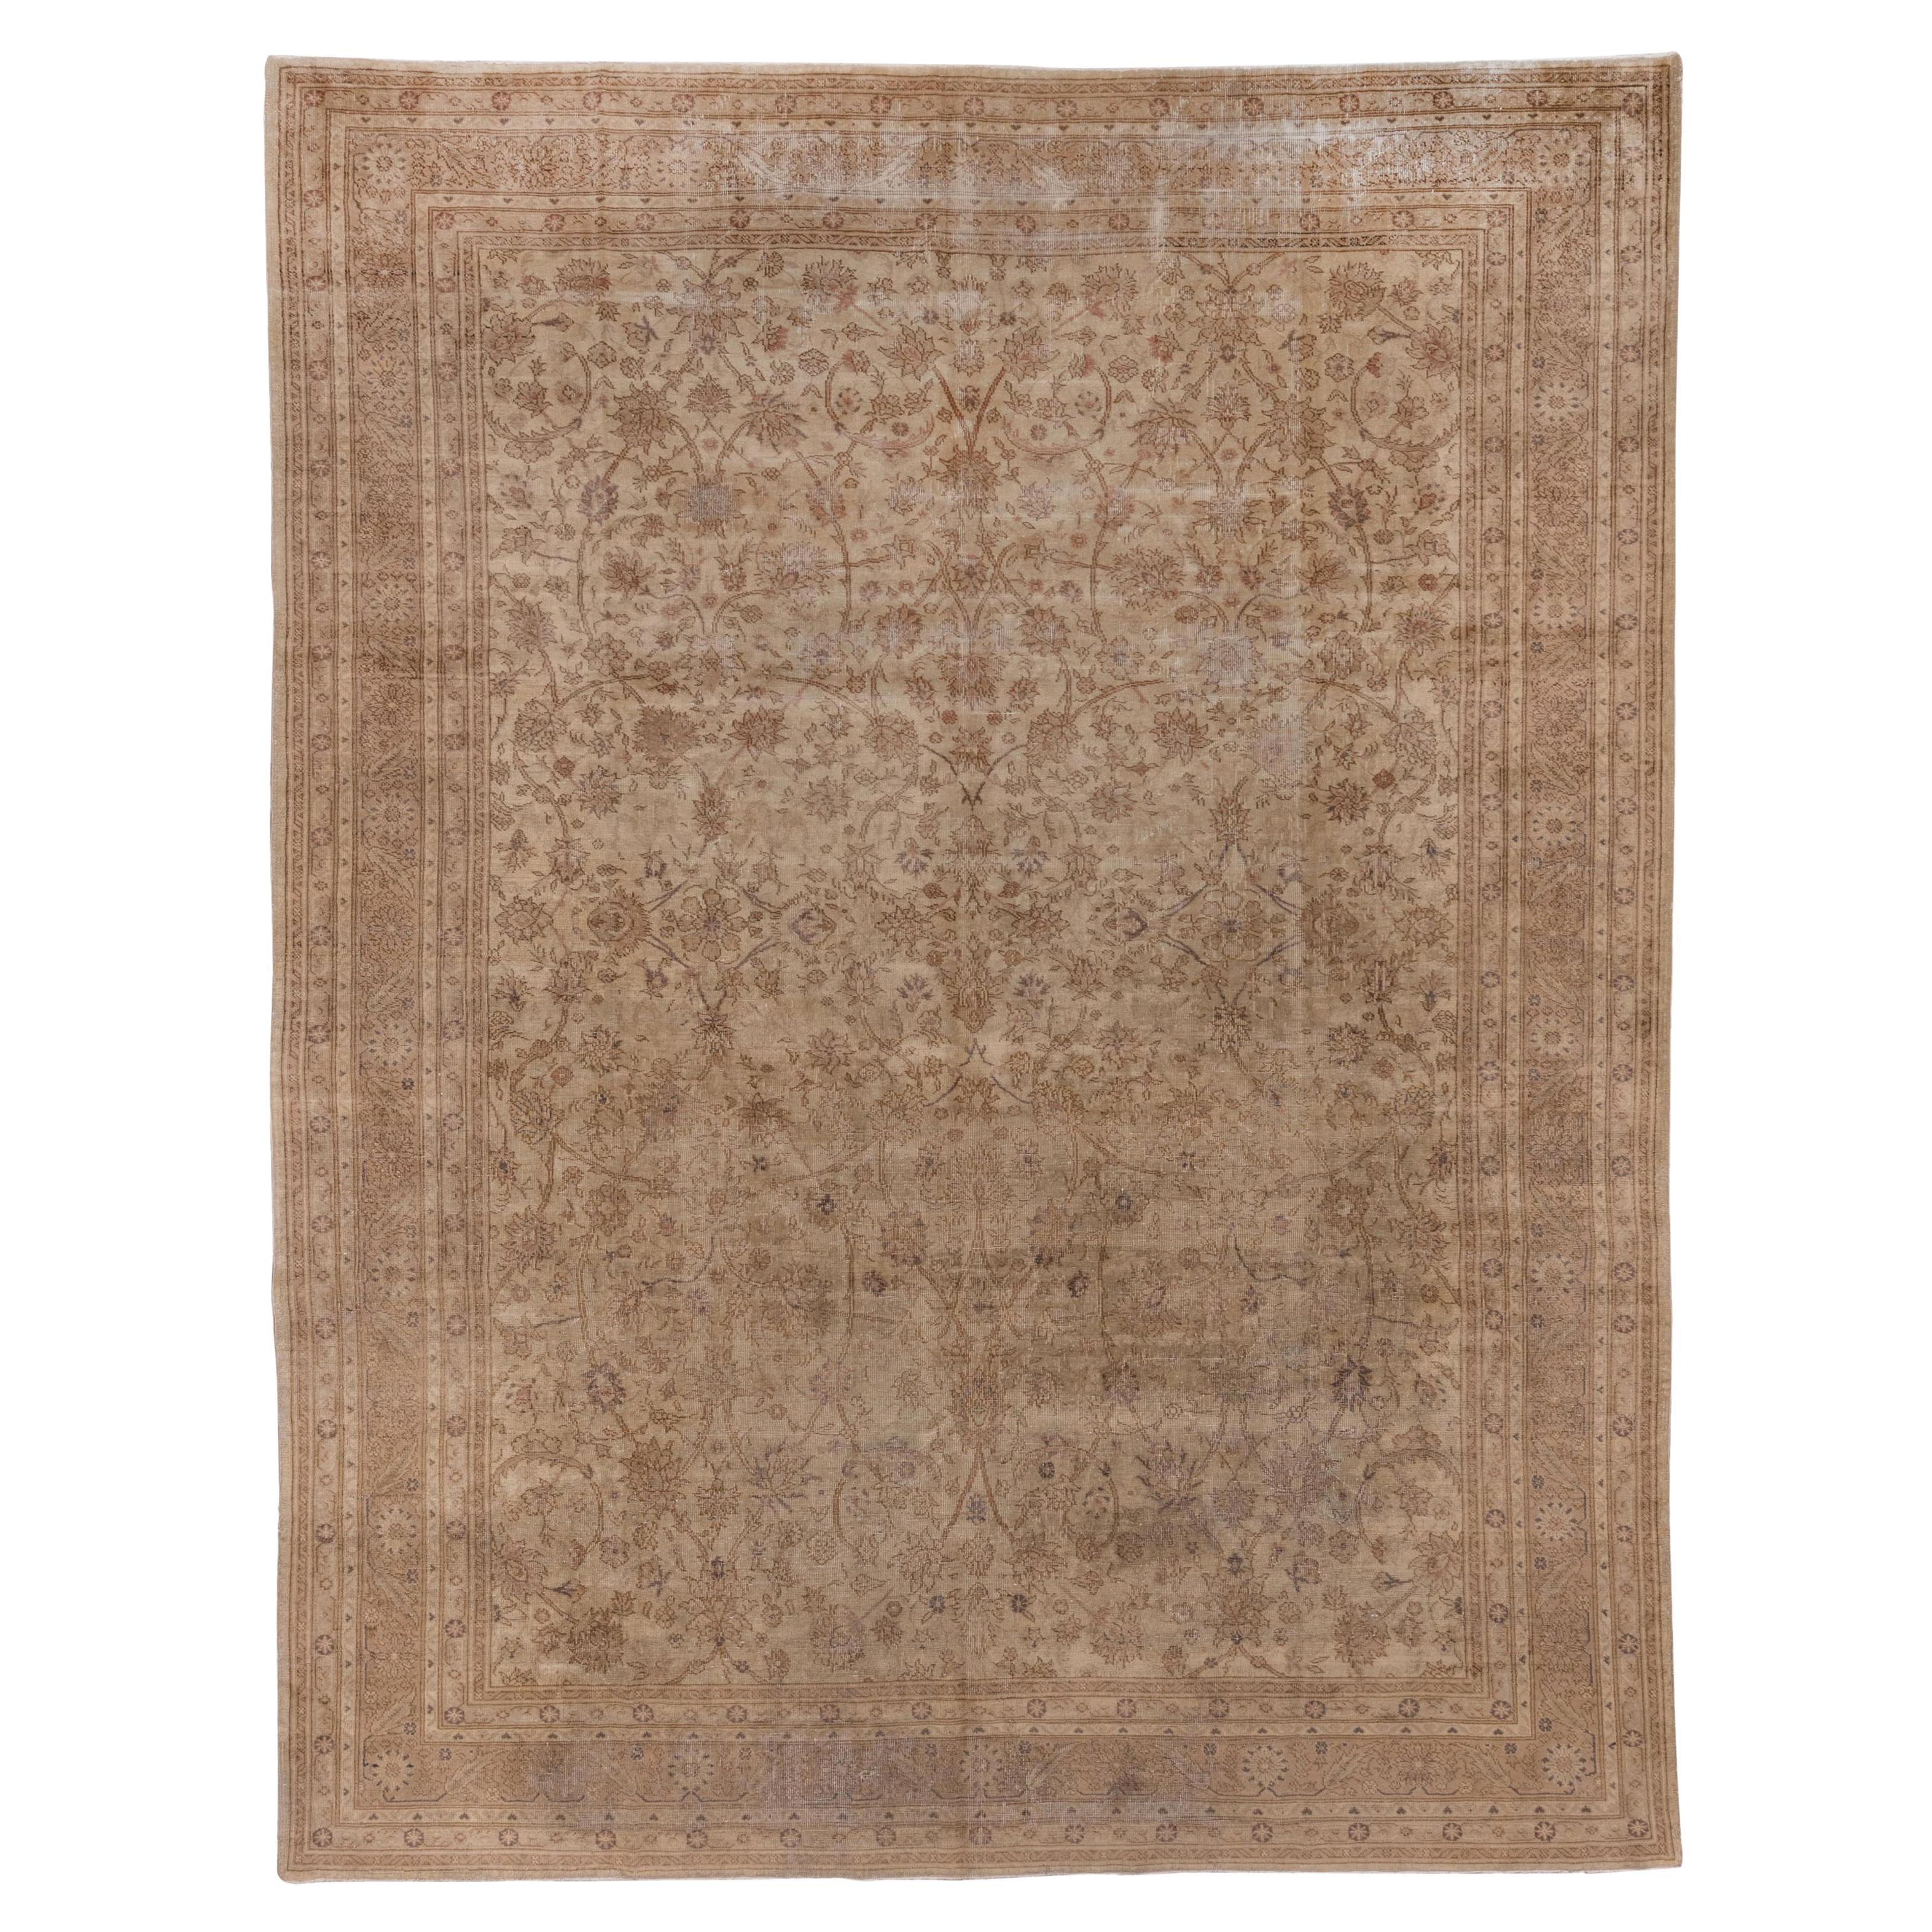 Antique Turkish Sivas Rug, Beige and Brown Palette, All-Over Field, circa 1920s For Sale